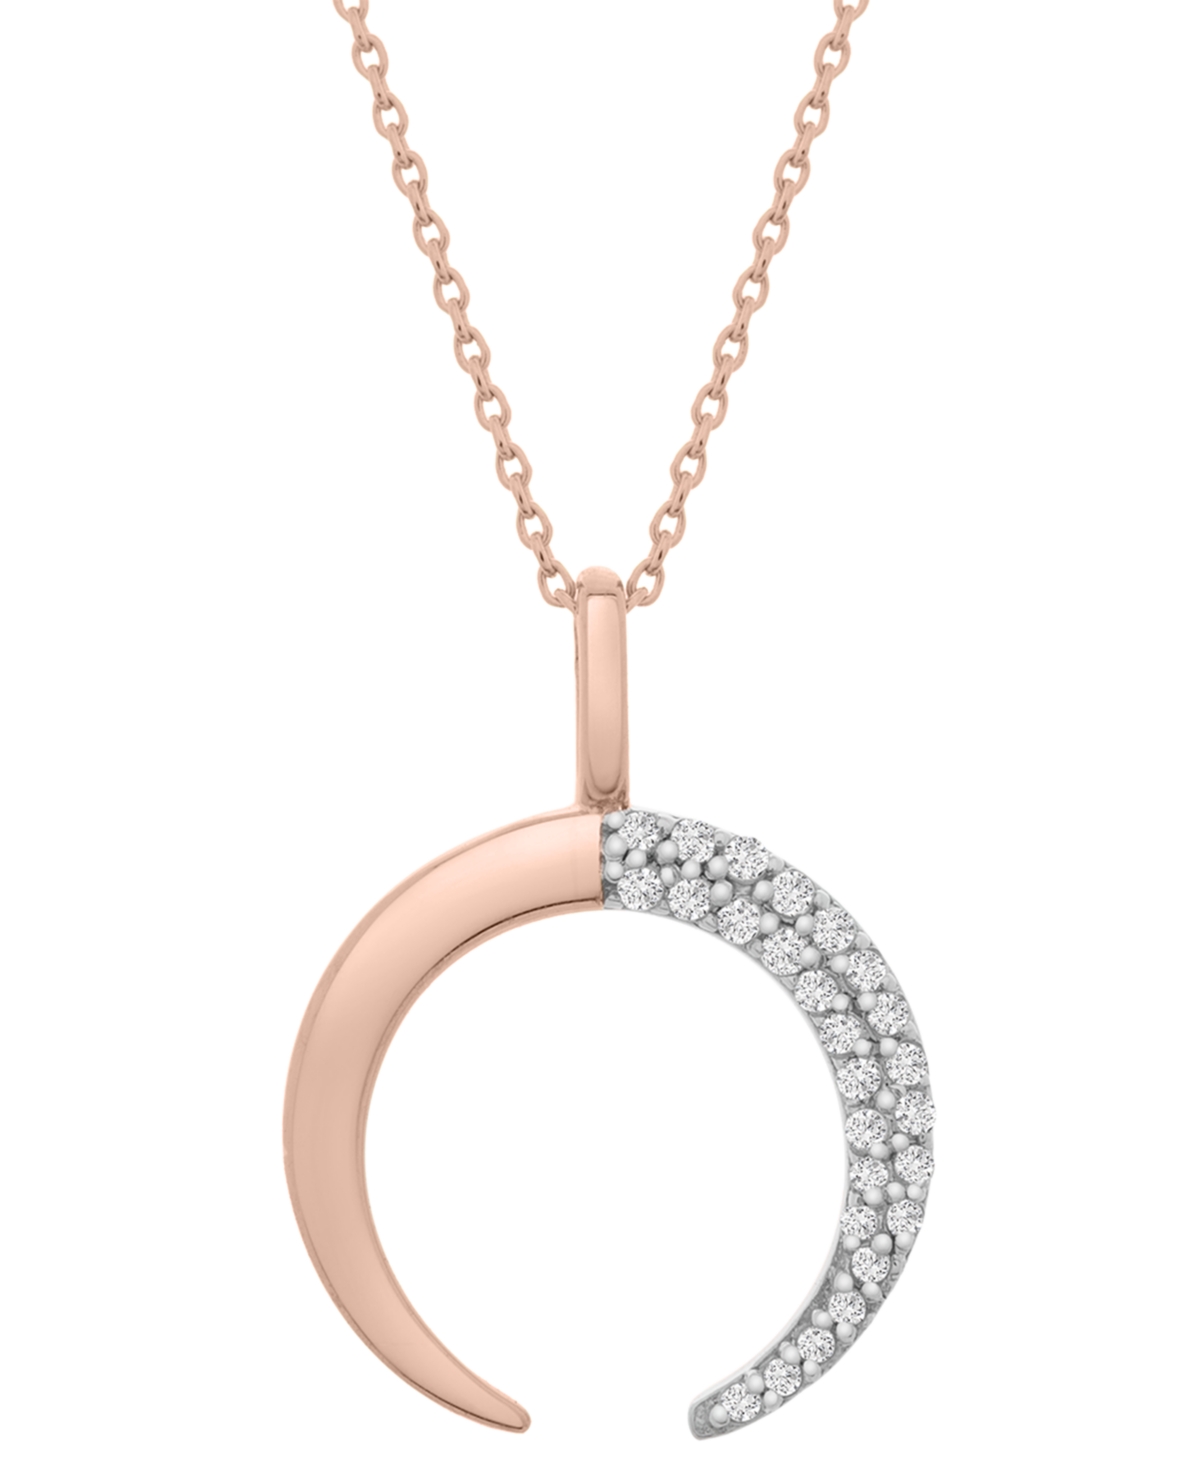 Diamond Crescent Moon 20" Pendant Necklace (1/10 ct. t.w.) in 14k Gold or 14k Rose Gold, Created for Macy's - Rose Gold